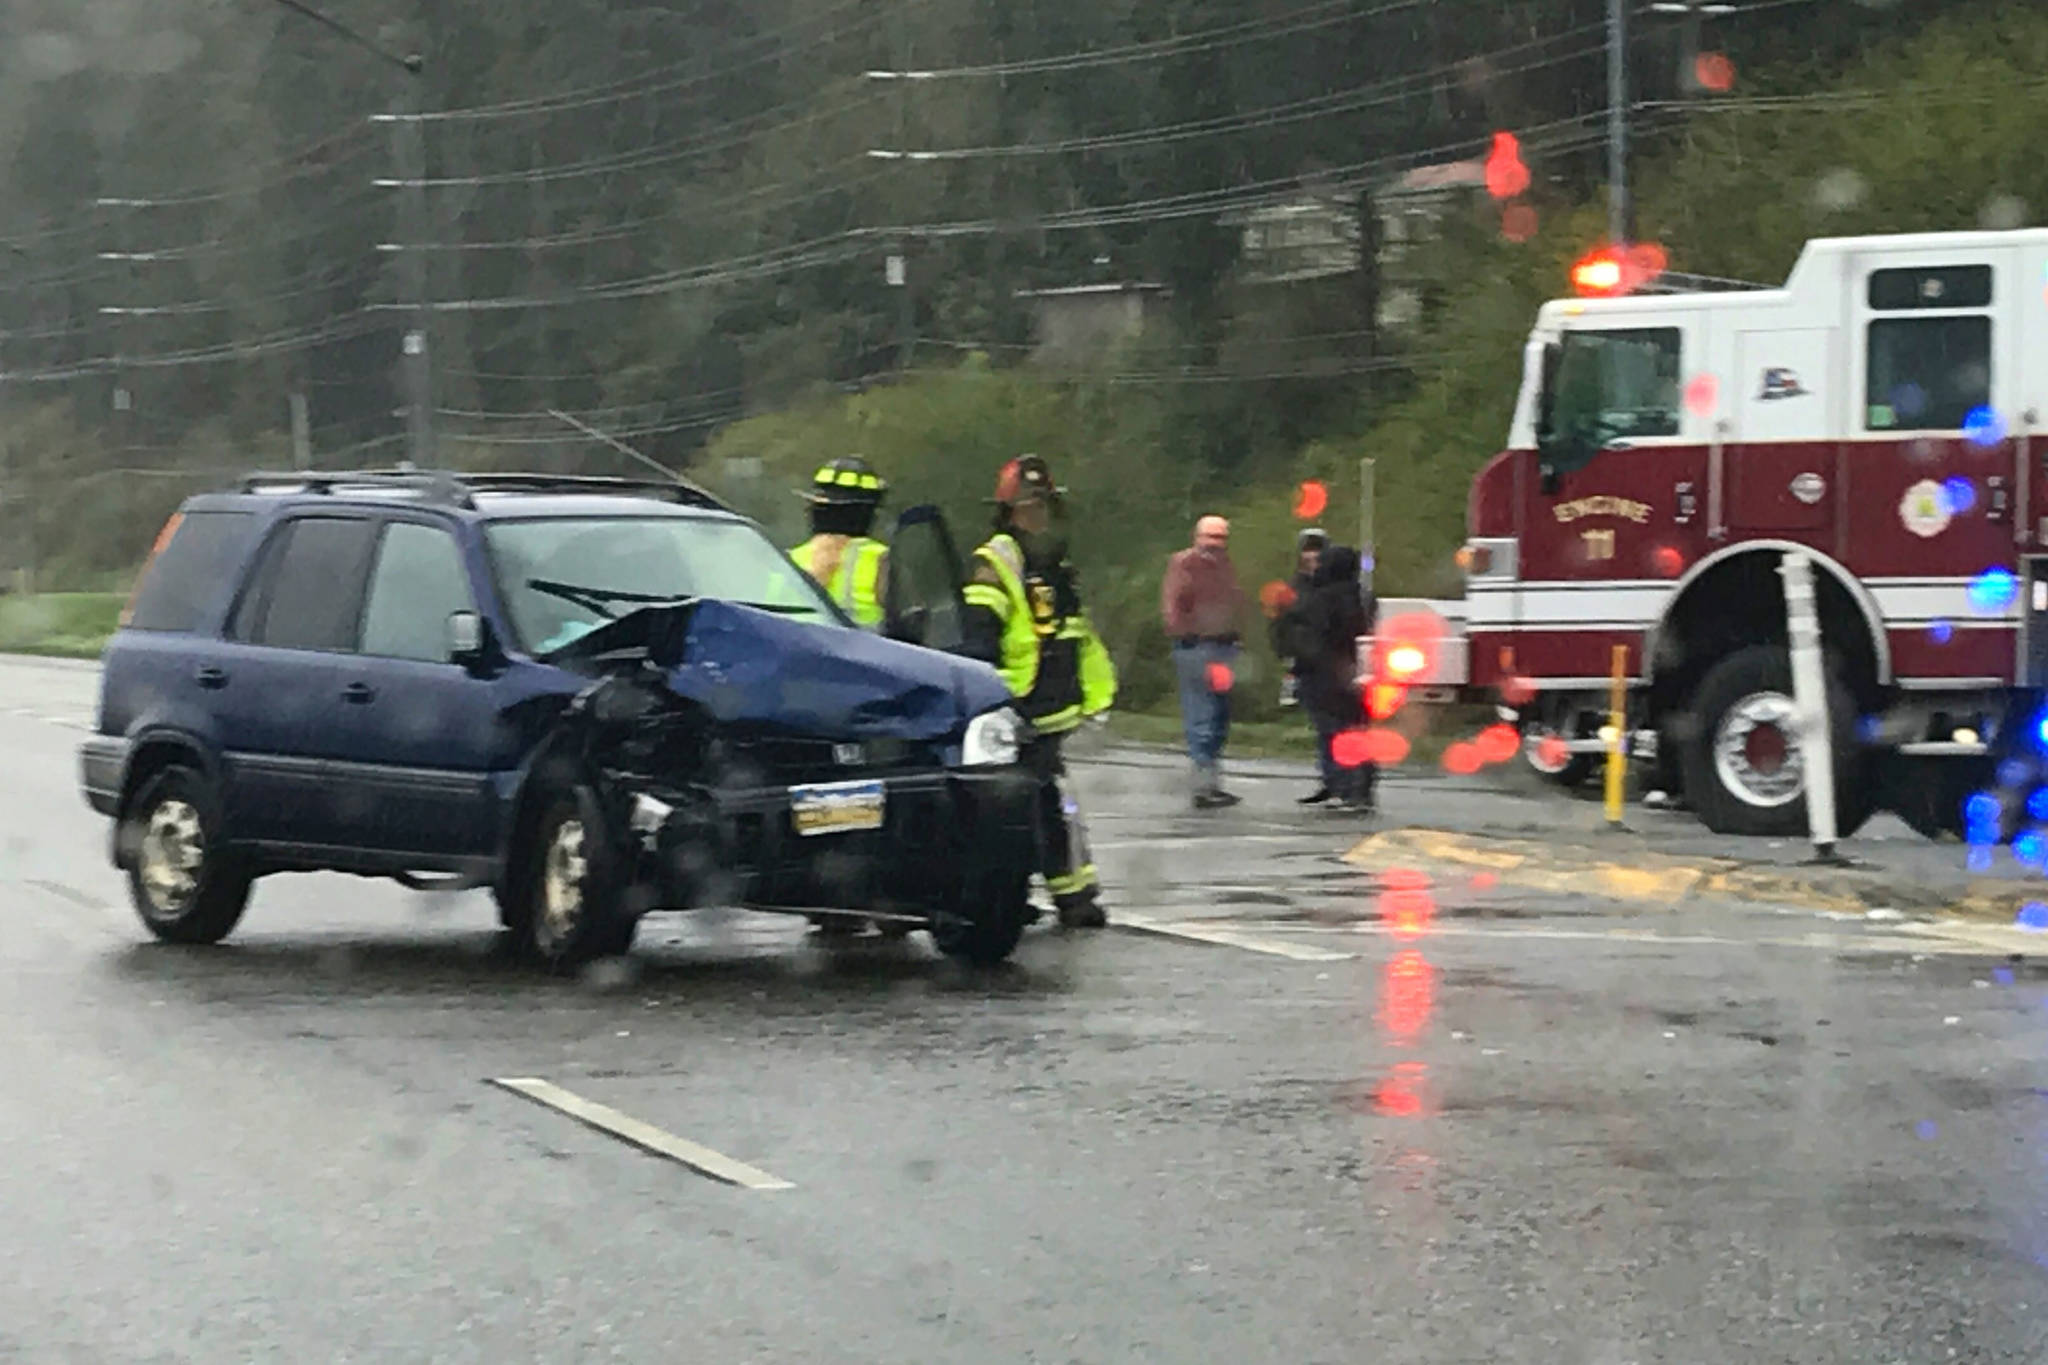 A Honda CRV sits on Egan Drive on Tuesday after a collision with a Ford Focus. No injuries were reported. (Michael Penn | Juneau Empire)